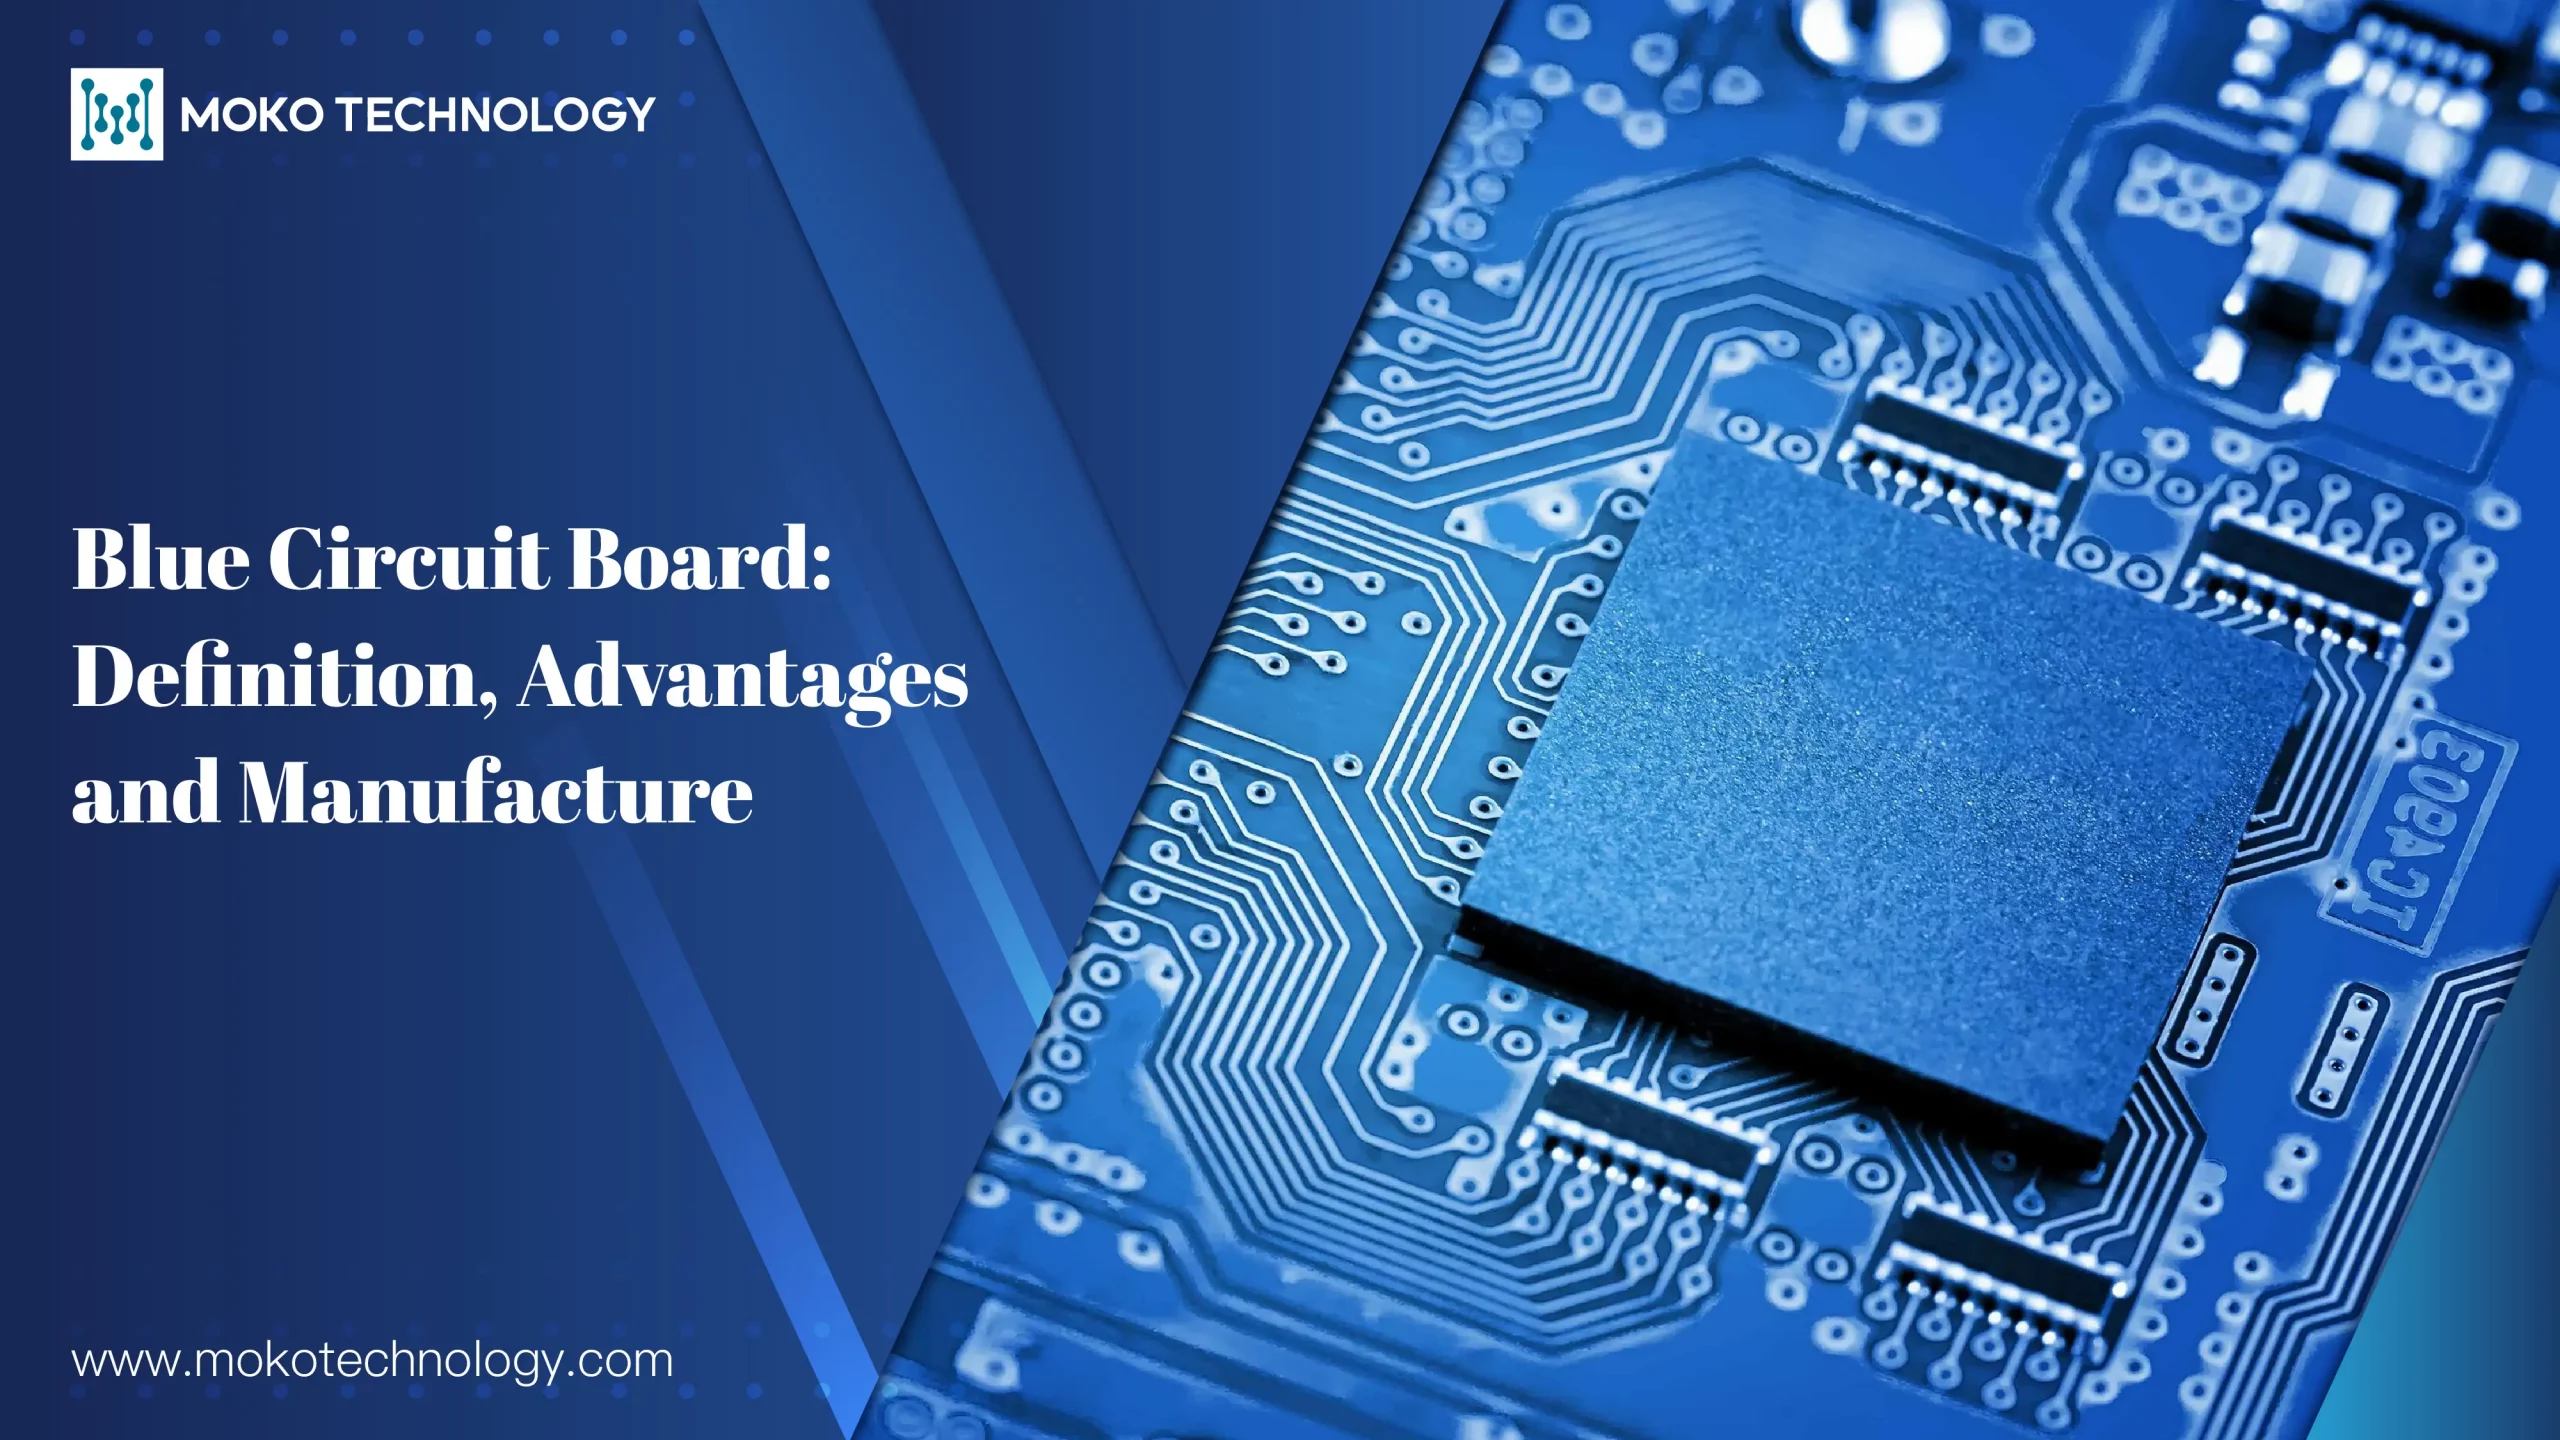 Blue Circuit Board: Definition, Advantages and Manufacture